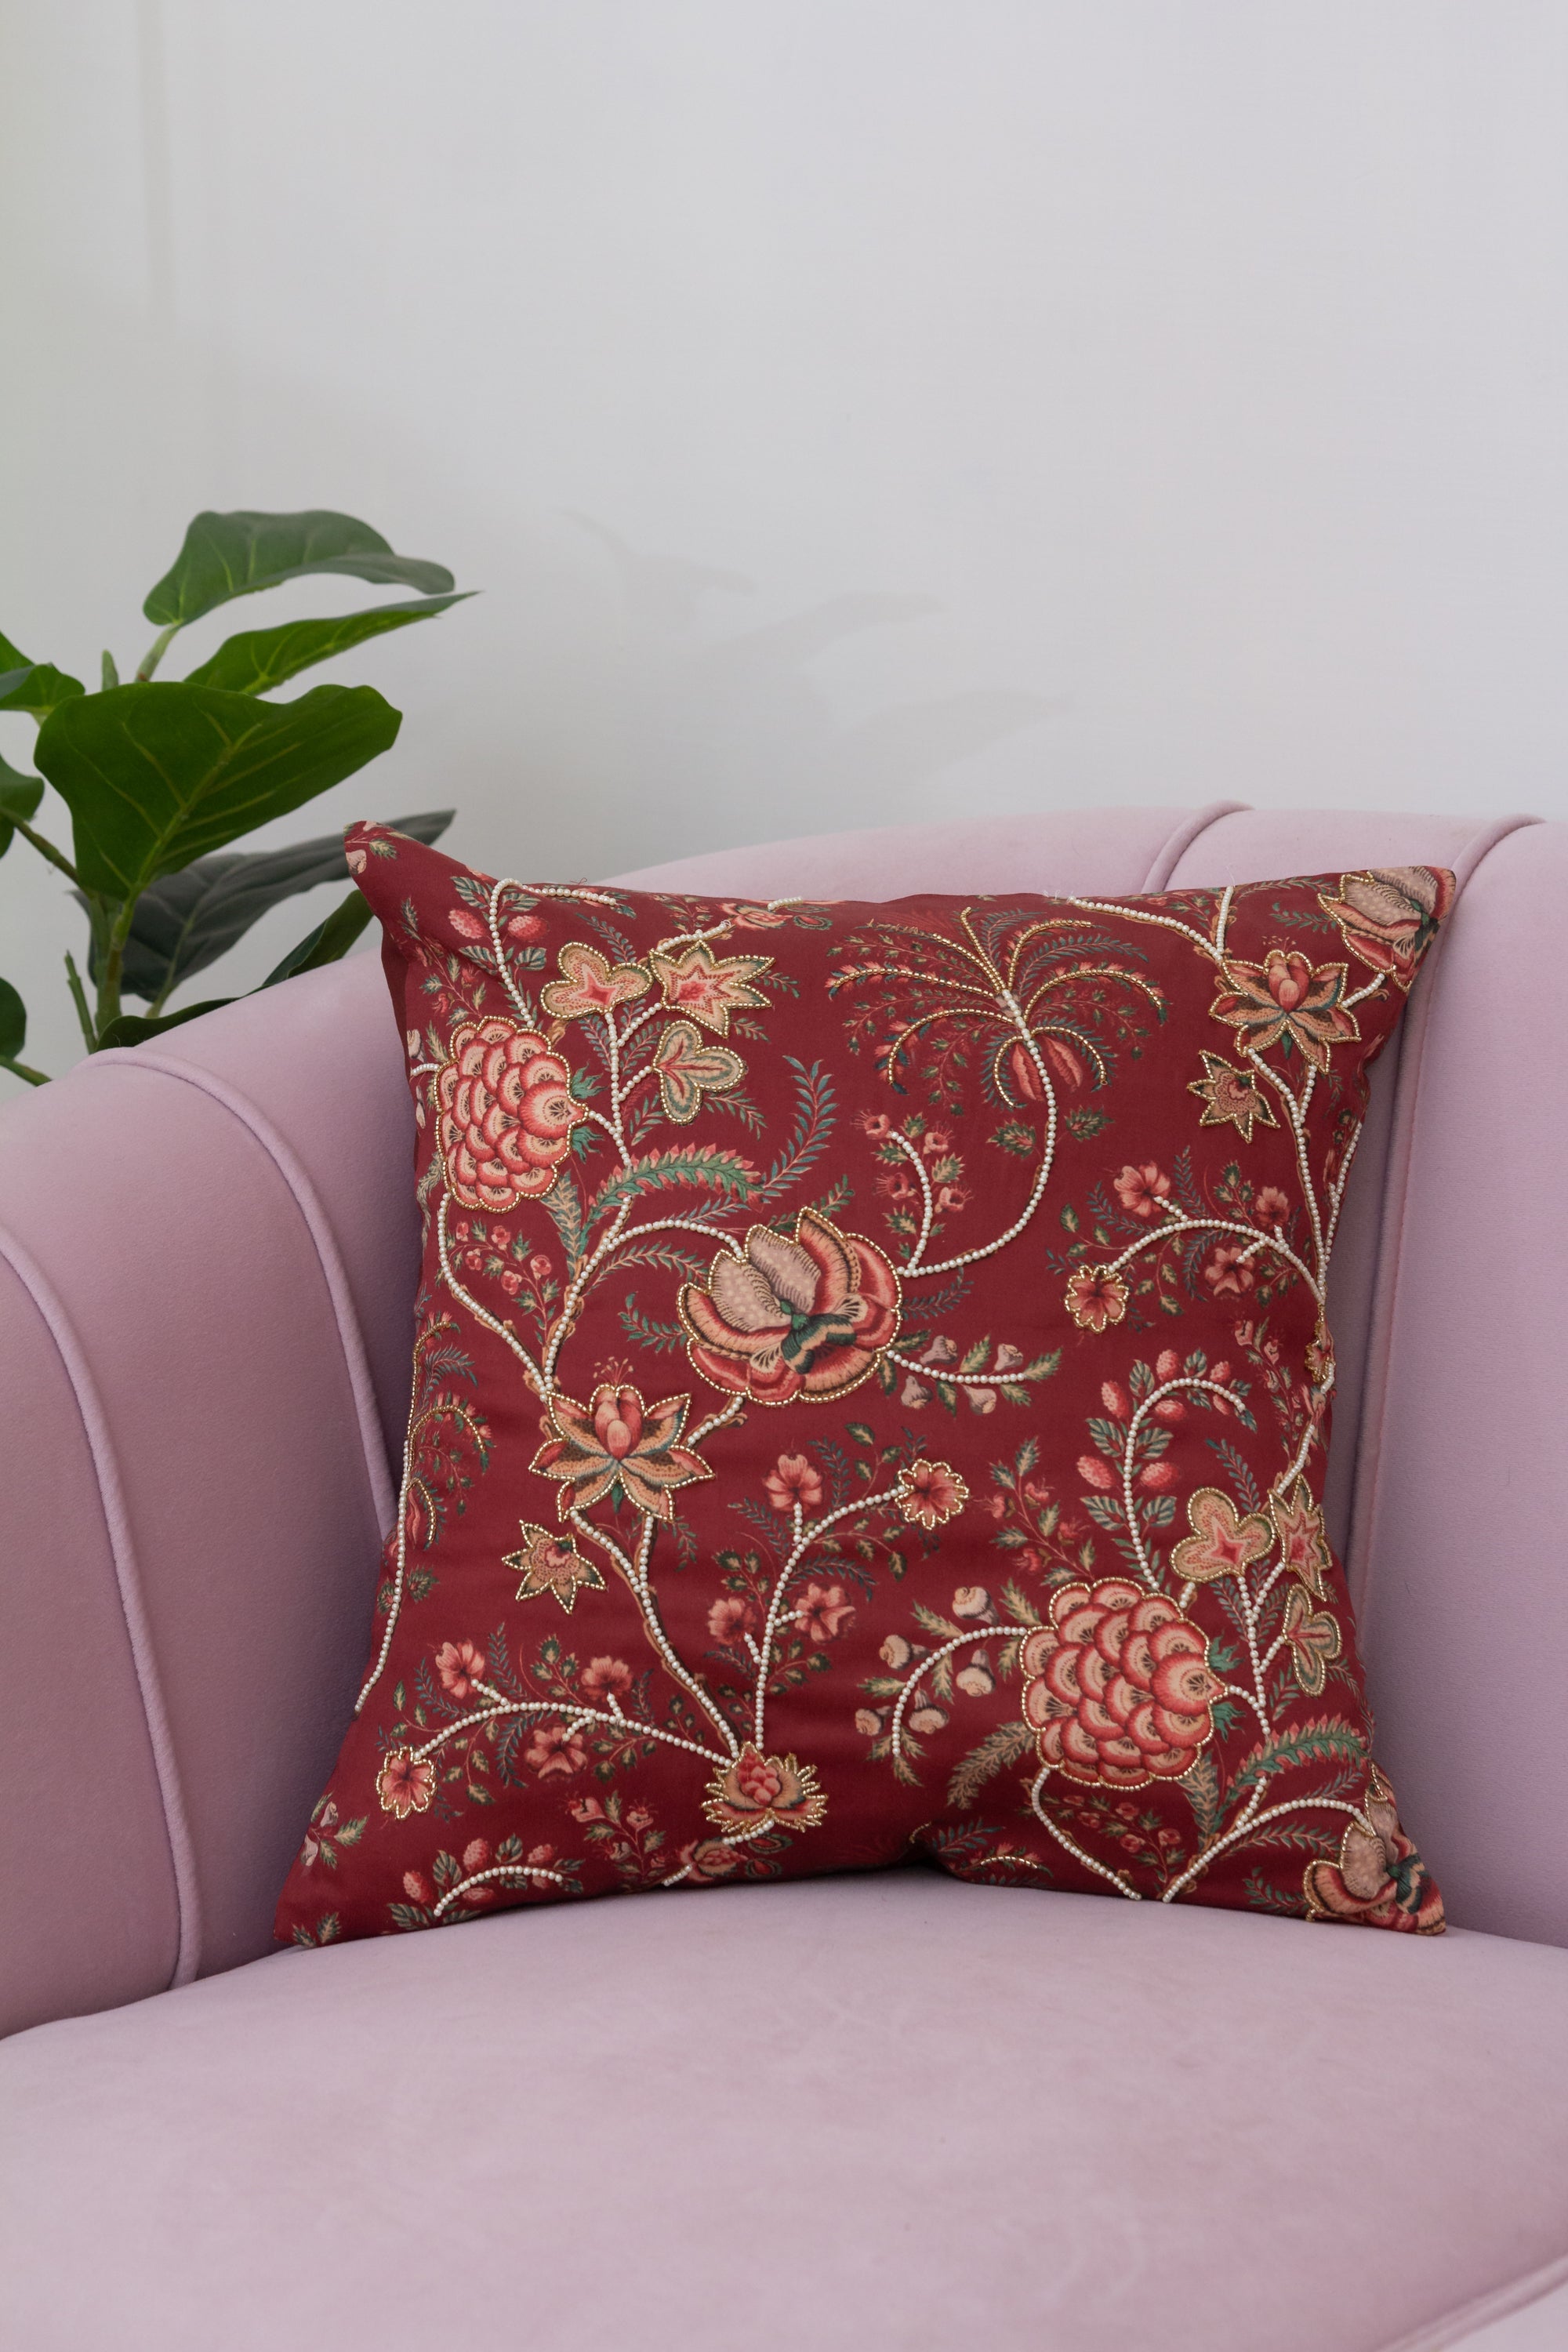 Floral Festive M Cushion Cover with Hand Embroidery